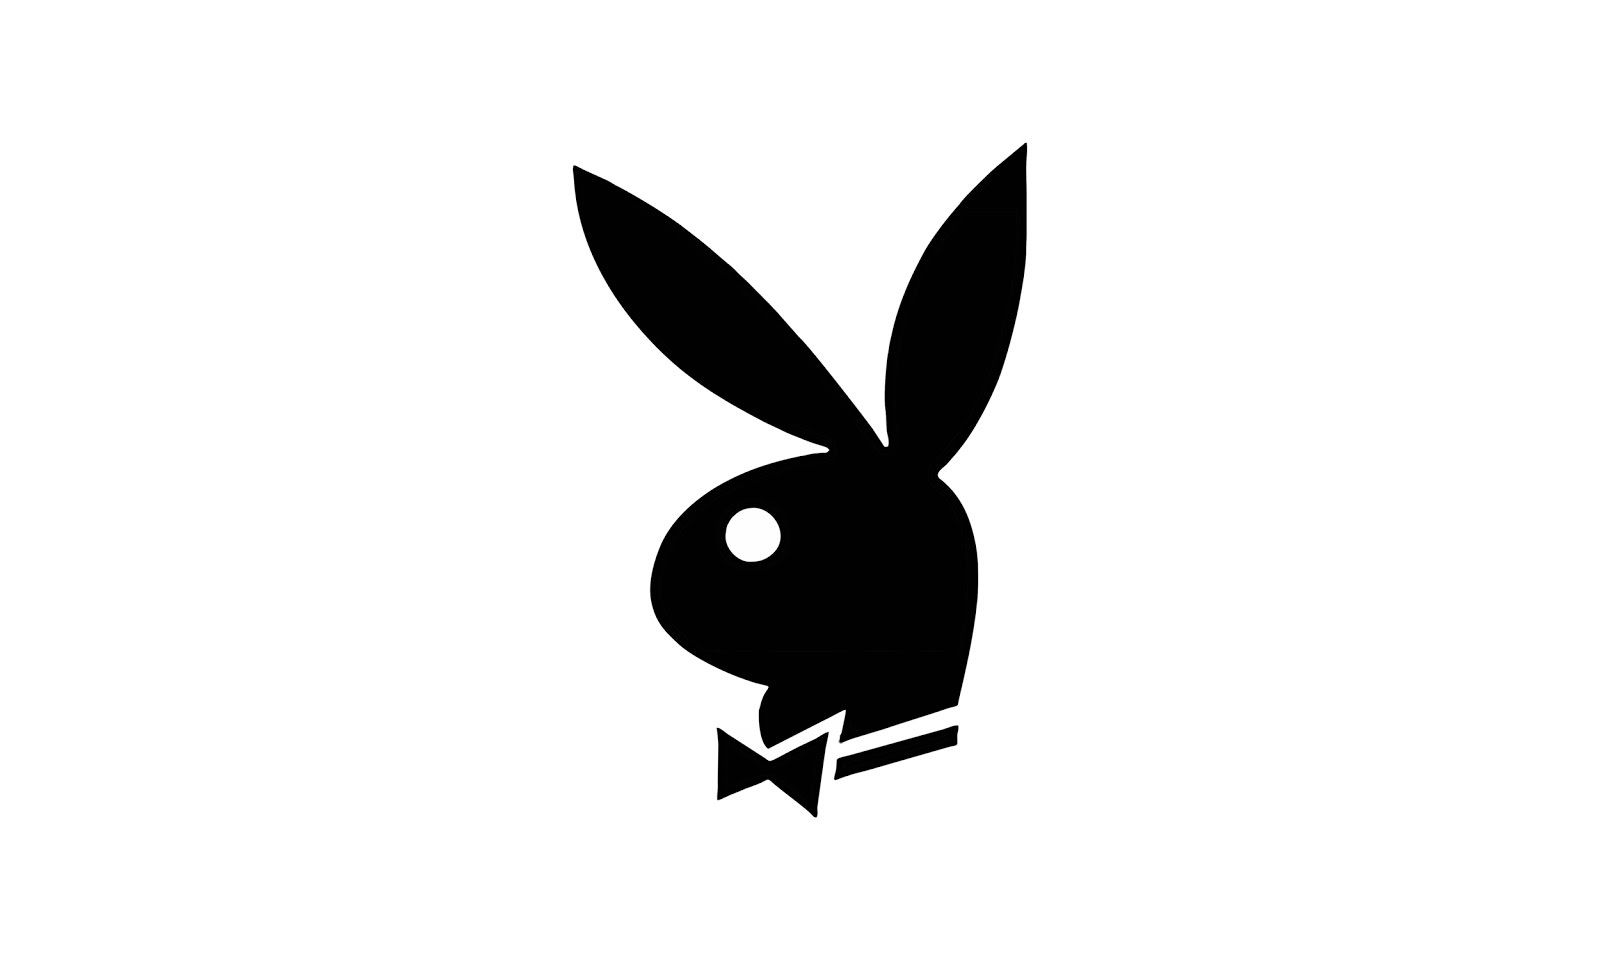 New Playboy Owners Look to Shutter Iconic Magazine